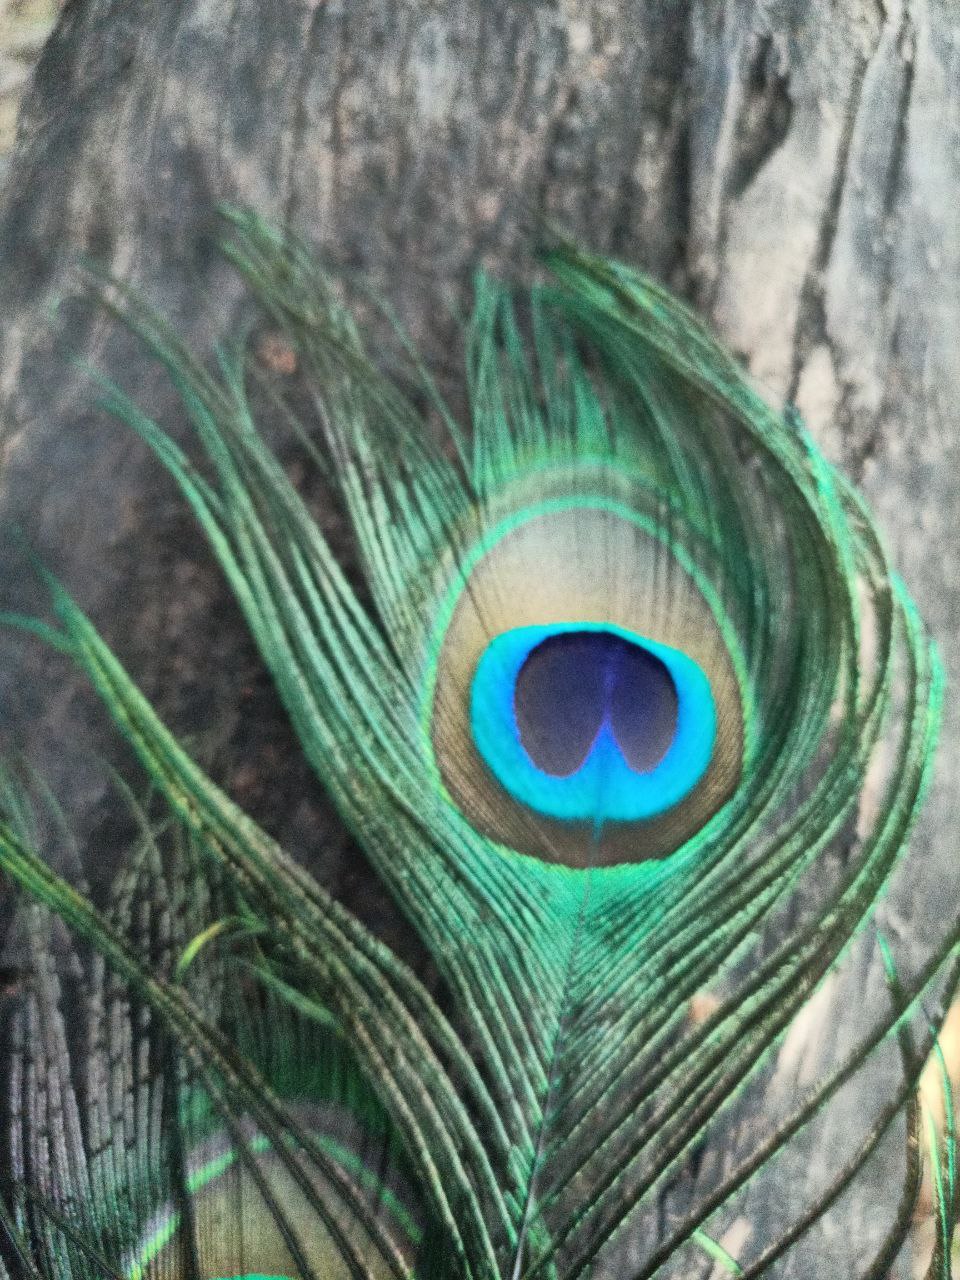 a close up of a peacock's eye